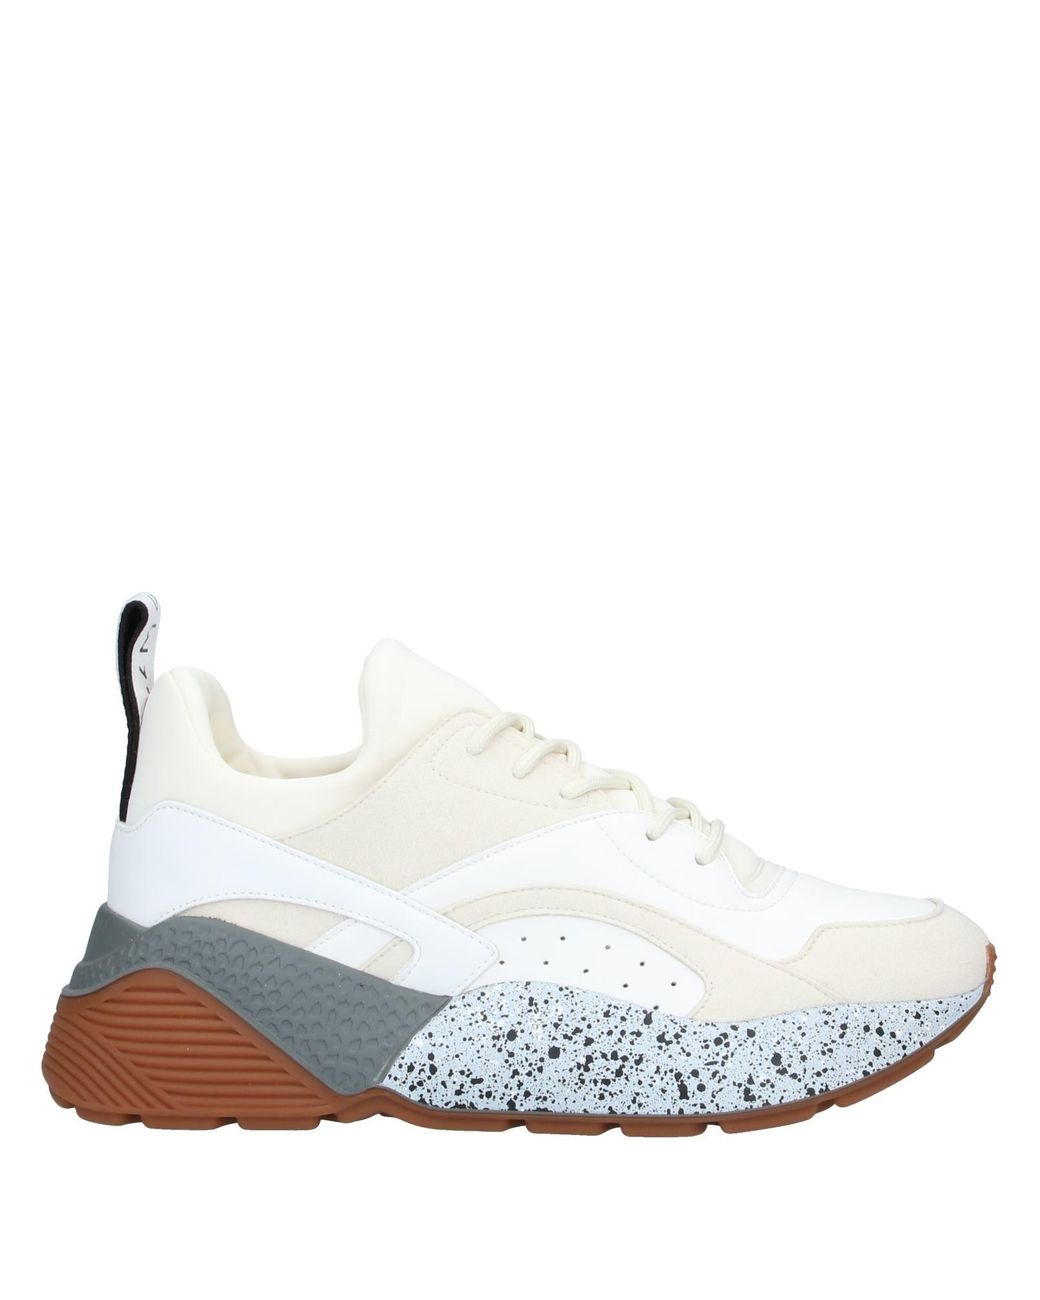 Stella McCartney Low-tops & Sneakers in Ivory (White) - Save 6% - Lyst